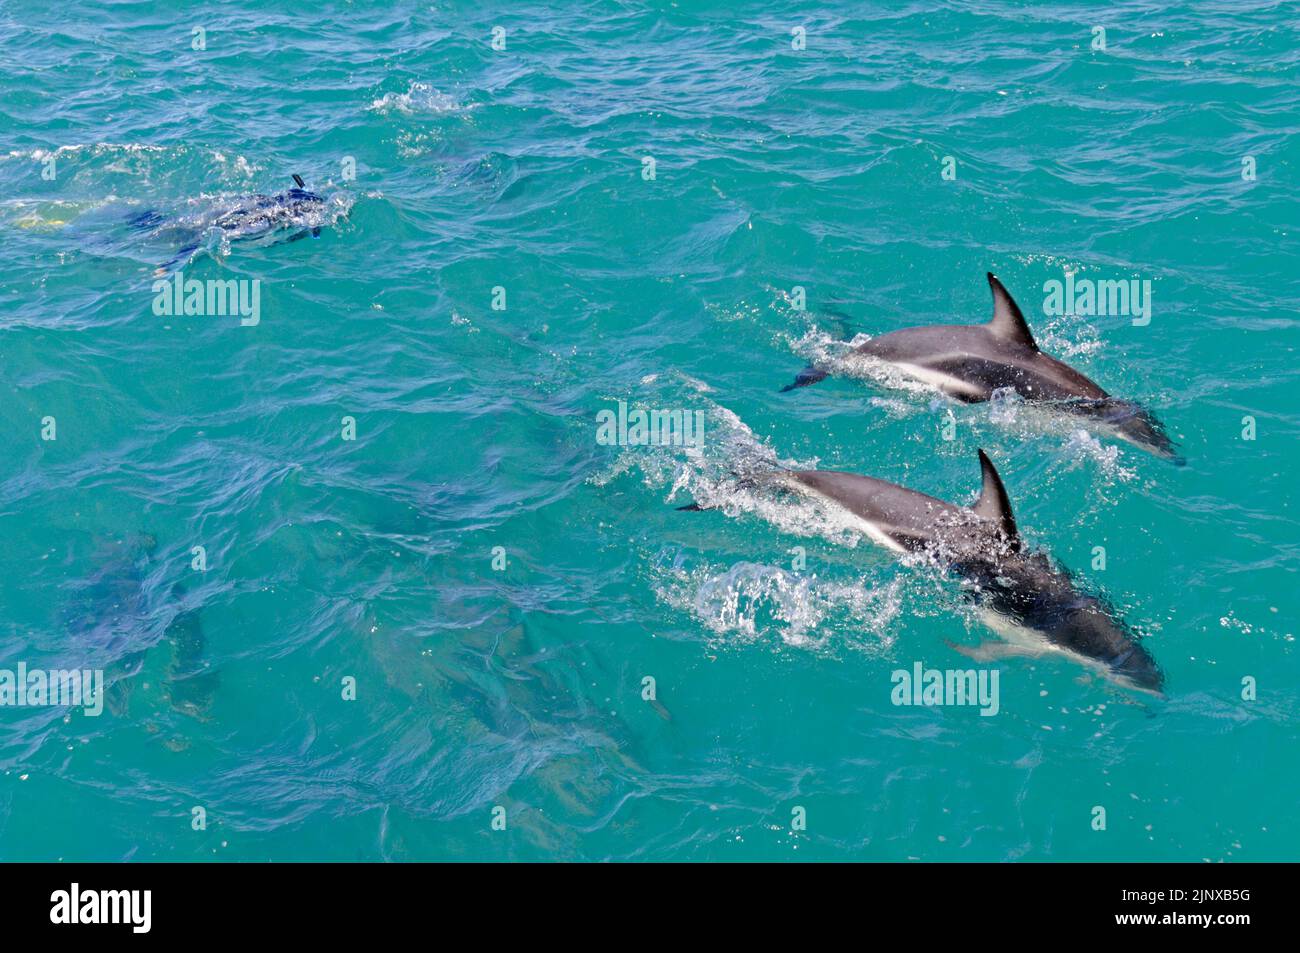 A tourist in a wet suit and goggles from a Swim Dolphin boat tries to swim closer to a pod of Dusky dolphins in the Pacific Ocean near the town of Stock Photo